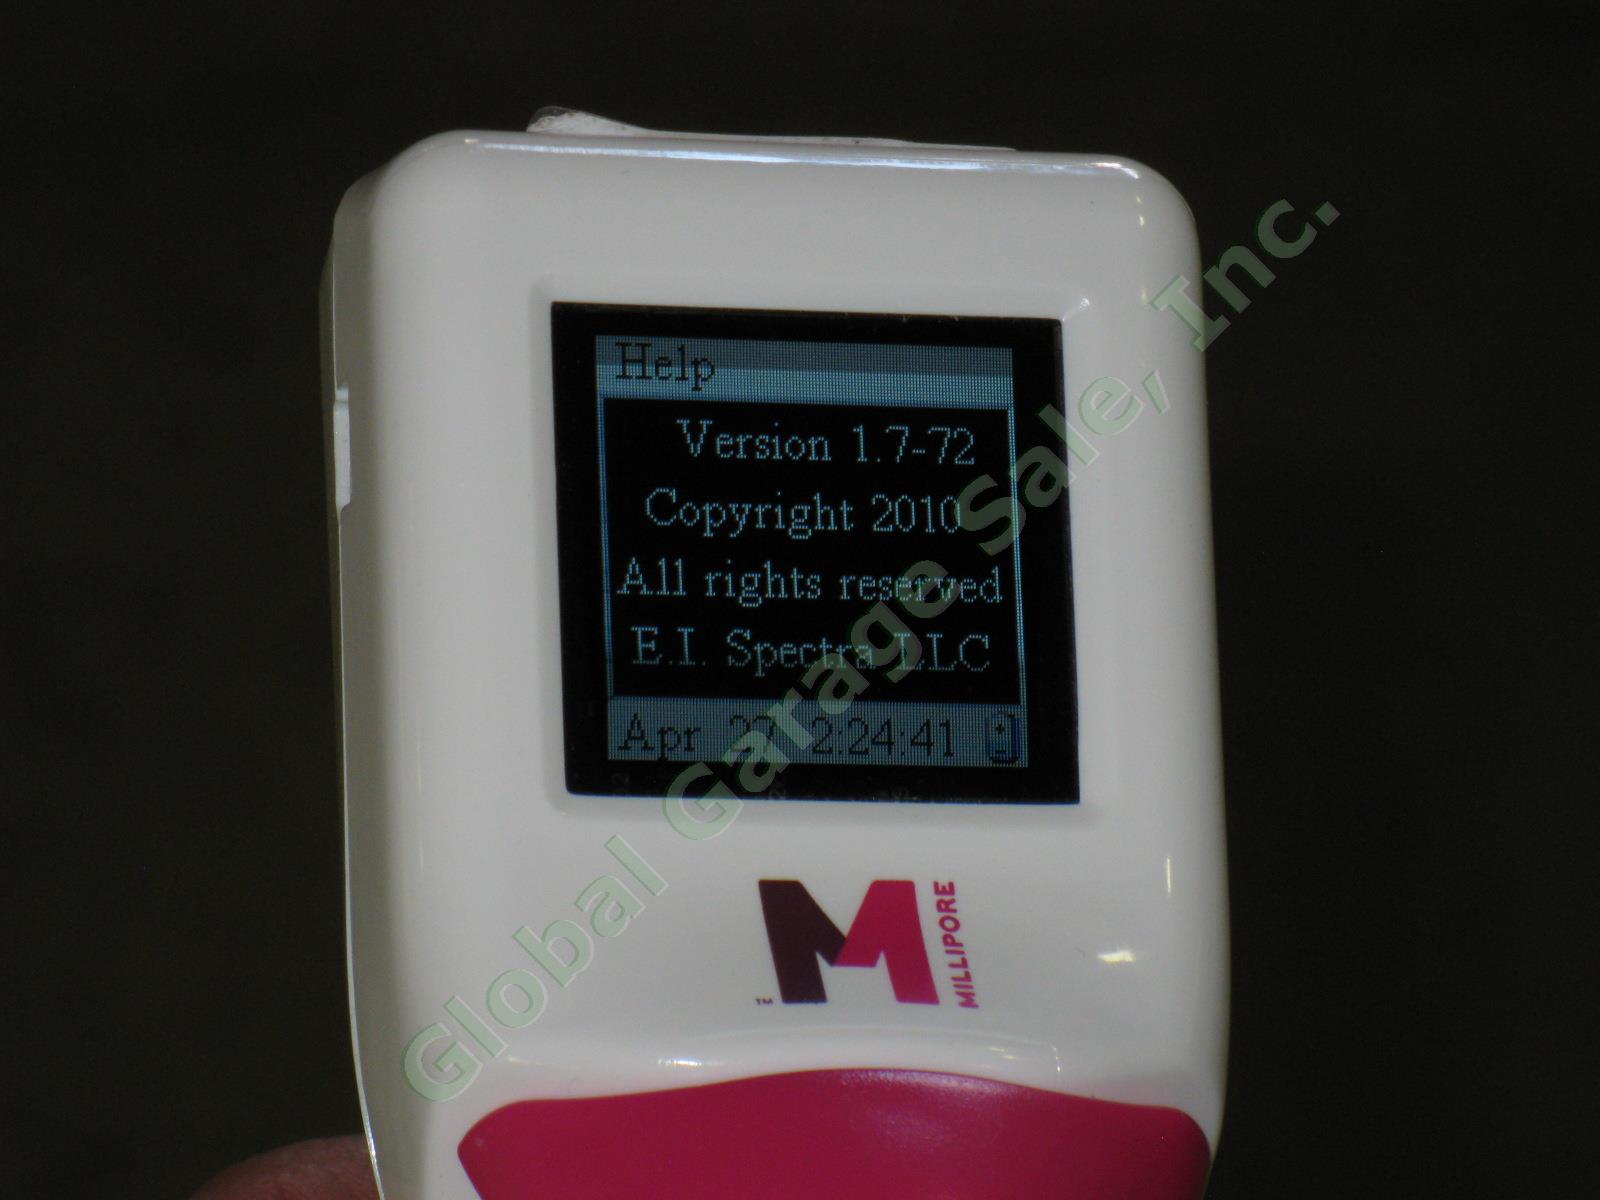 Millipore Scepter Handheld Automated Cell Counter Version 1.7-72 w/Sensors + Box 5